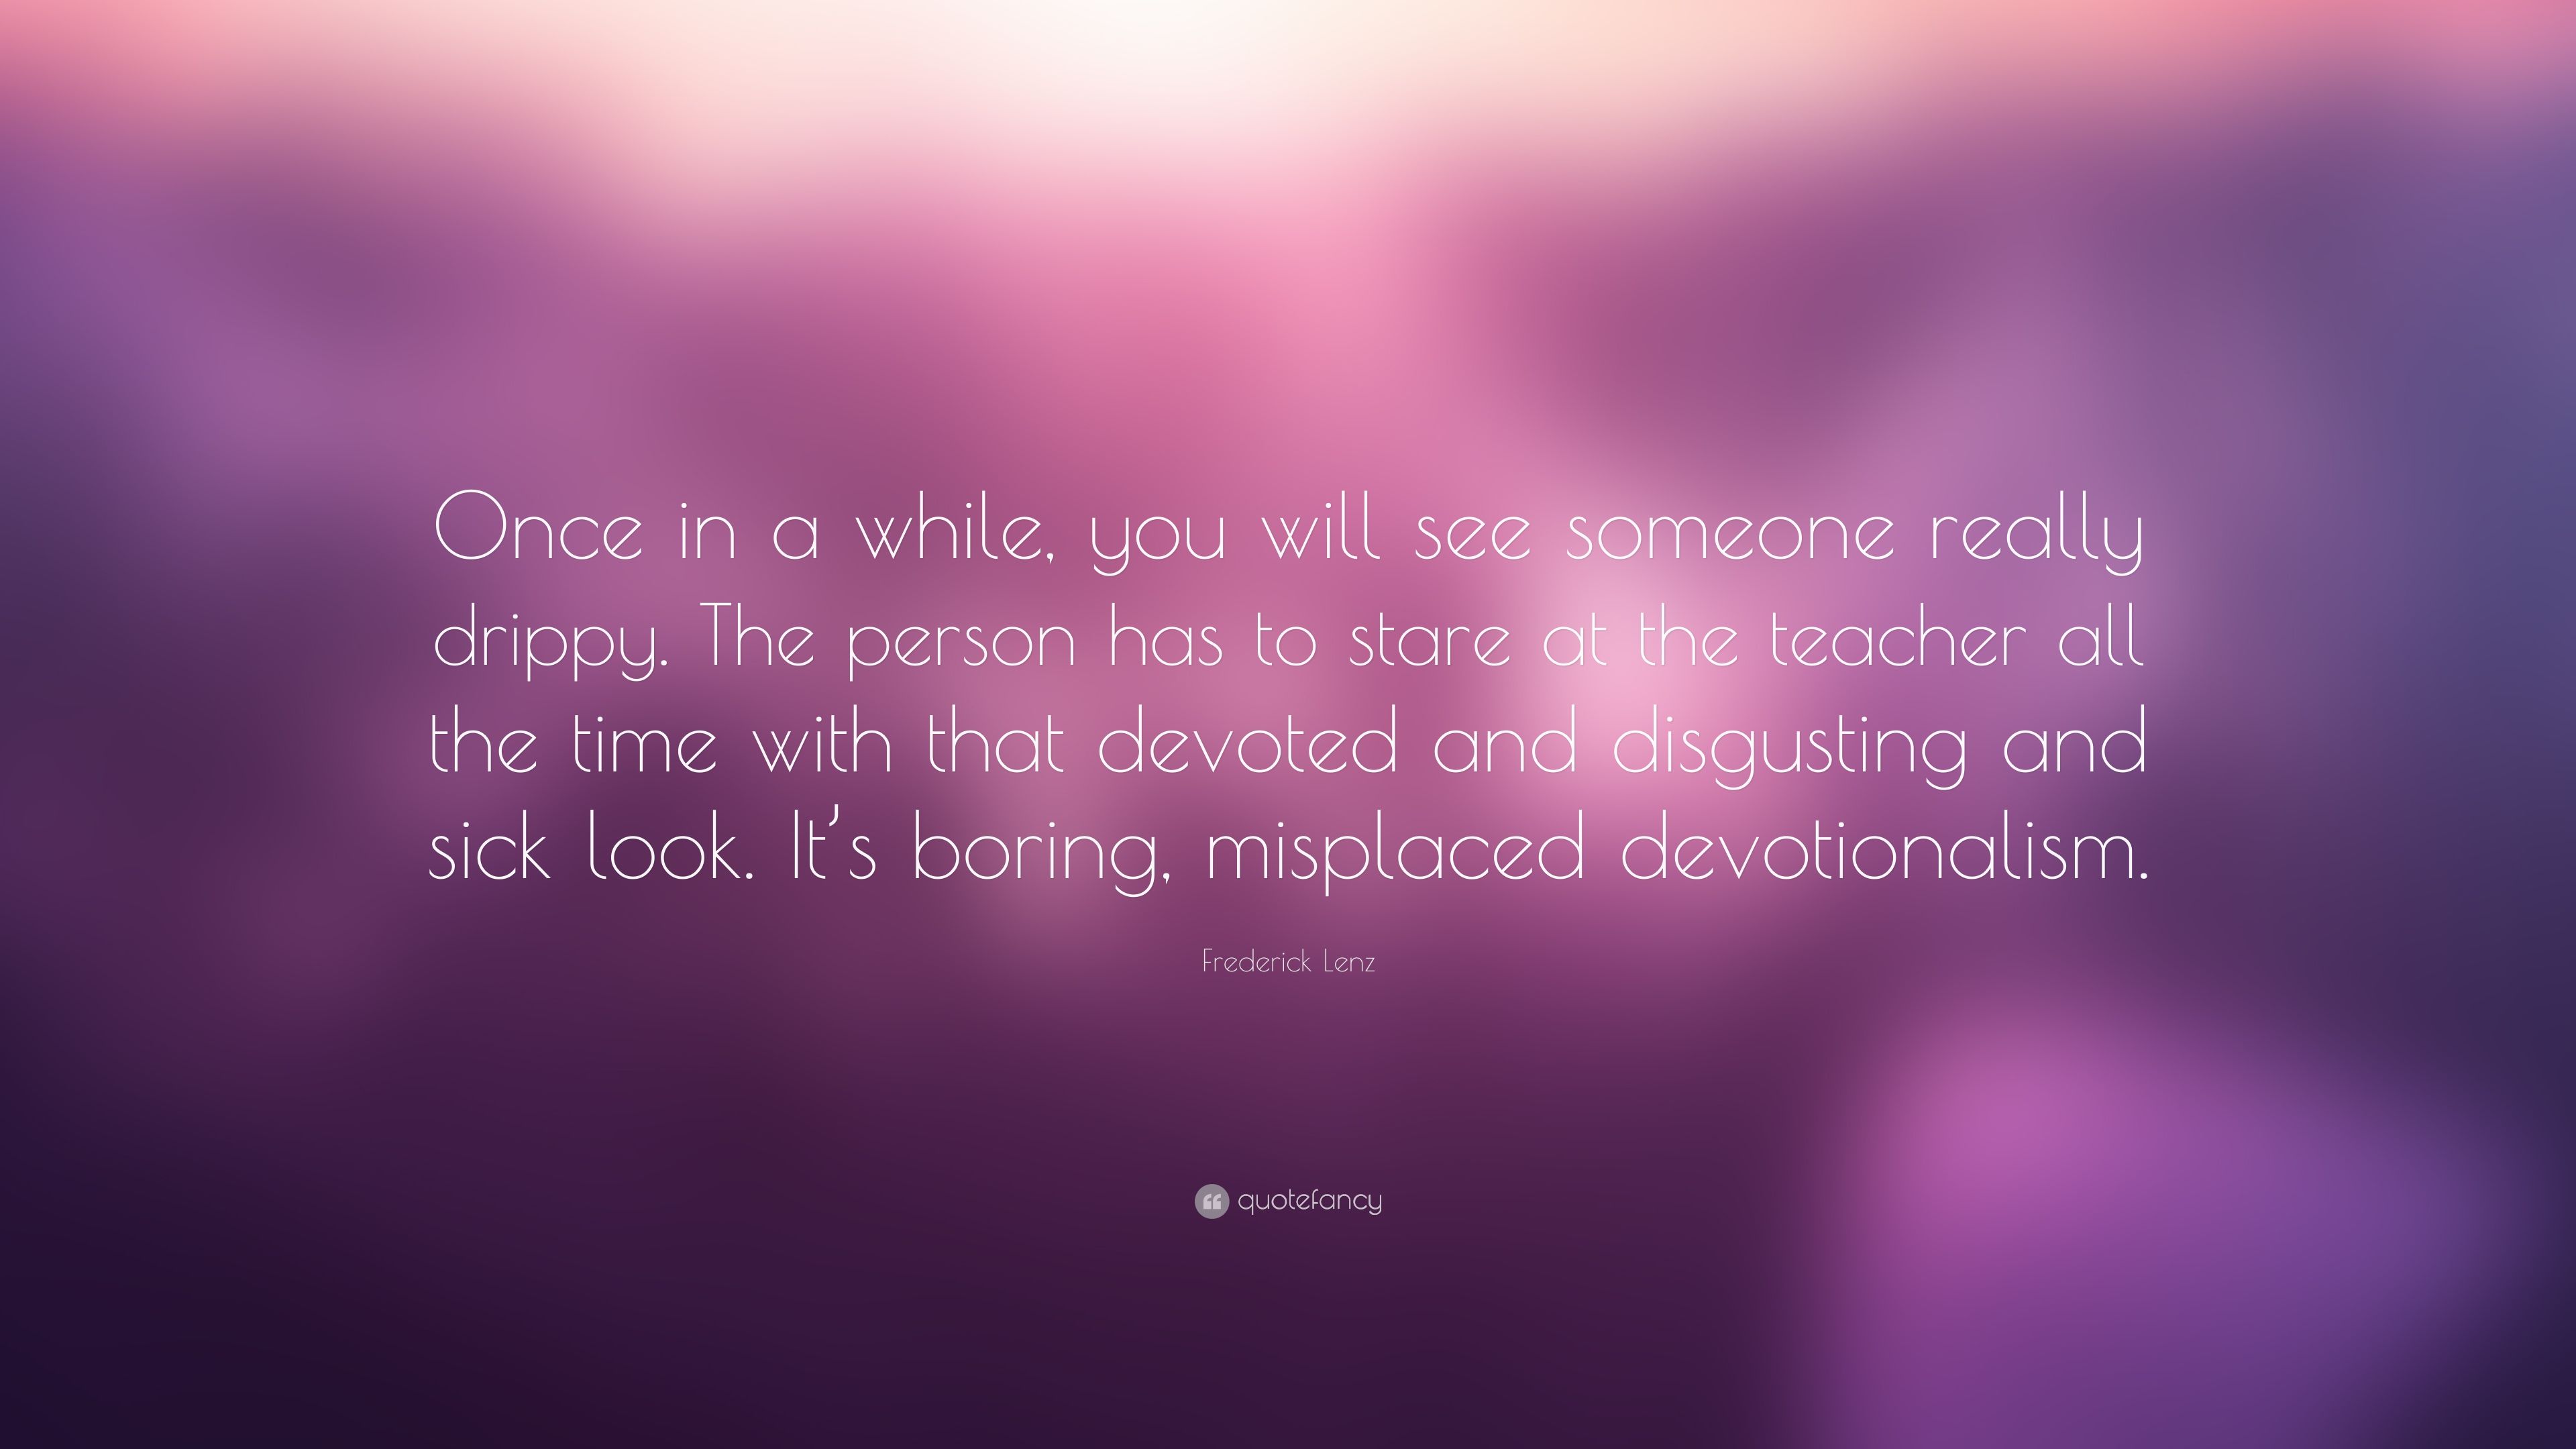 Frederick Lenz Quote: “Once in a while, you will see someone